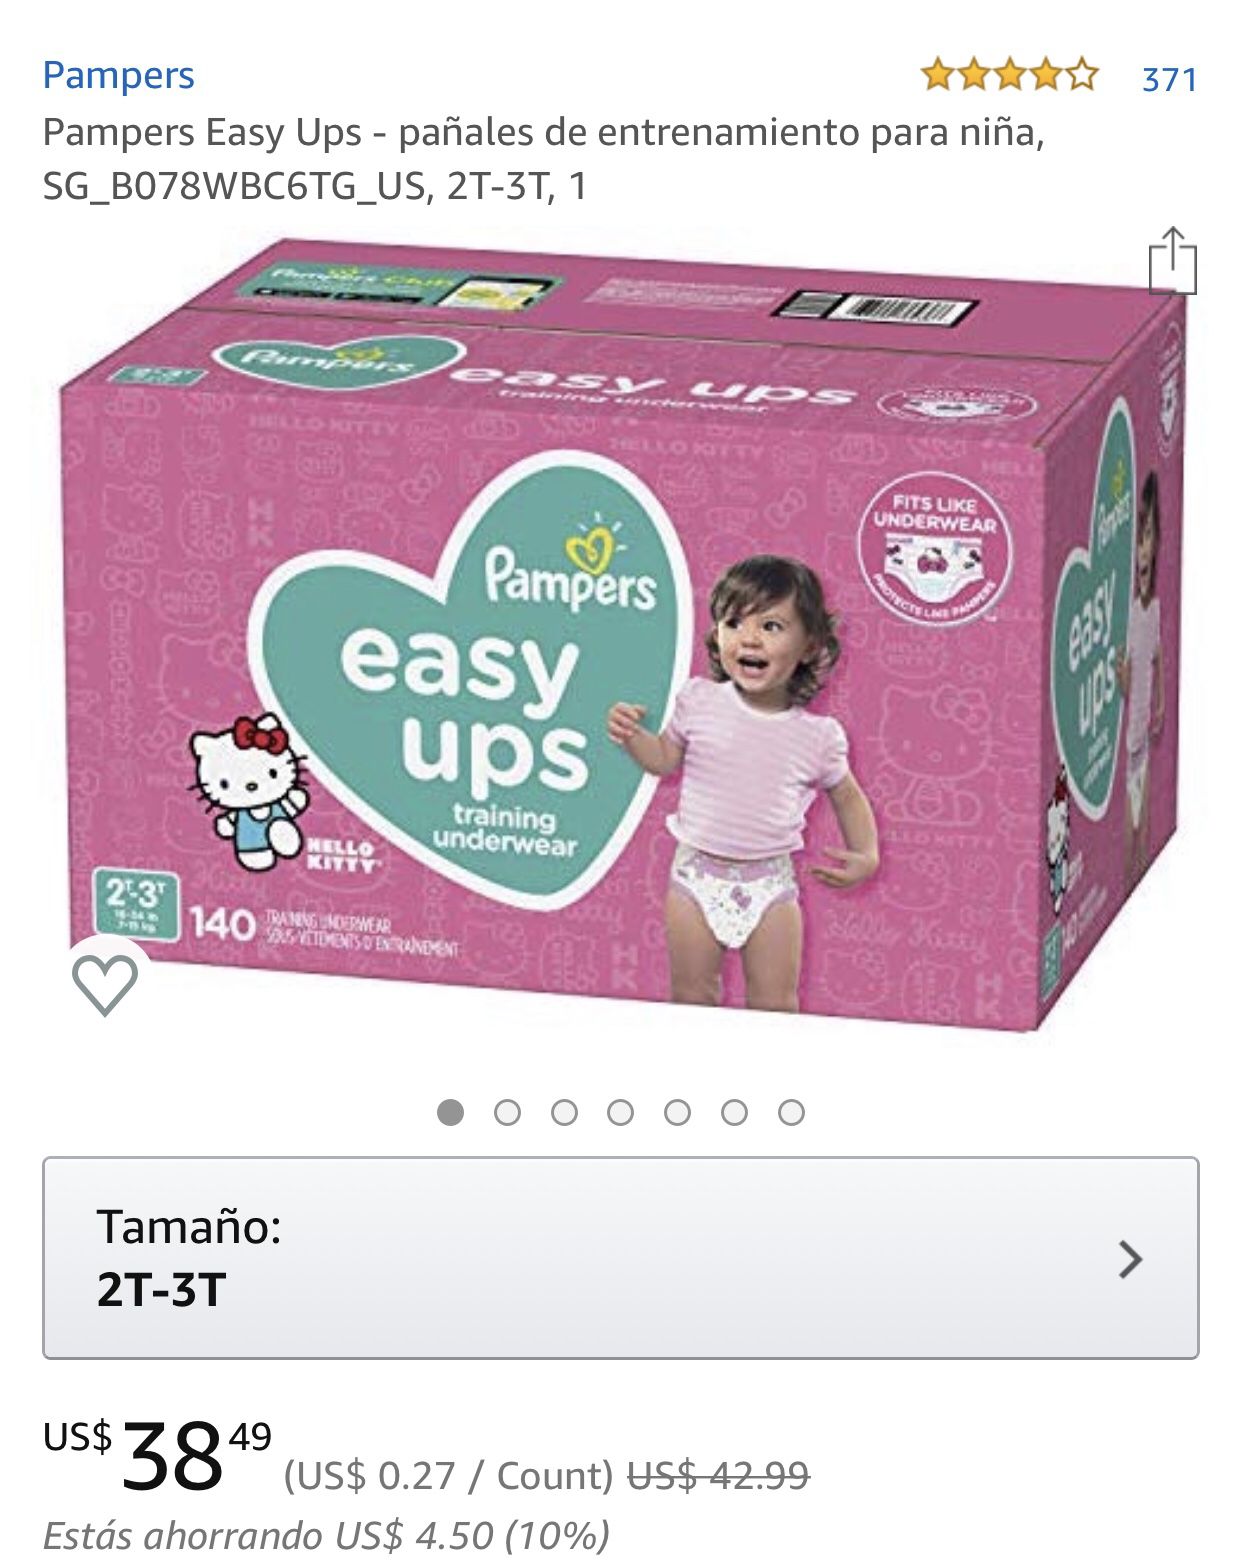 Pampers easy ups 140 & Huggies pull-Ups 124 (2T-3T). .... 2x 55 dólares